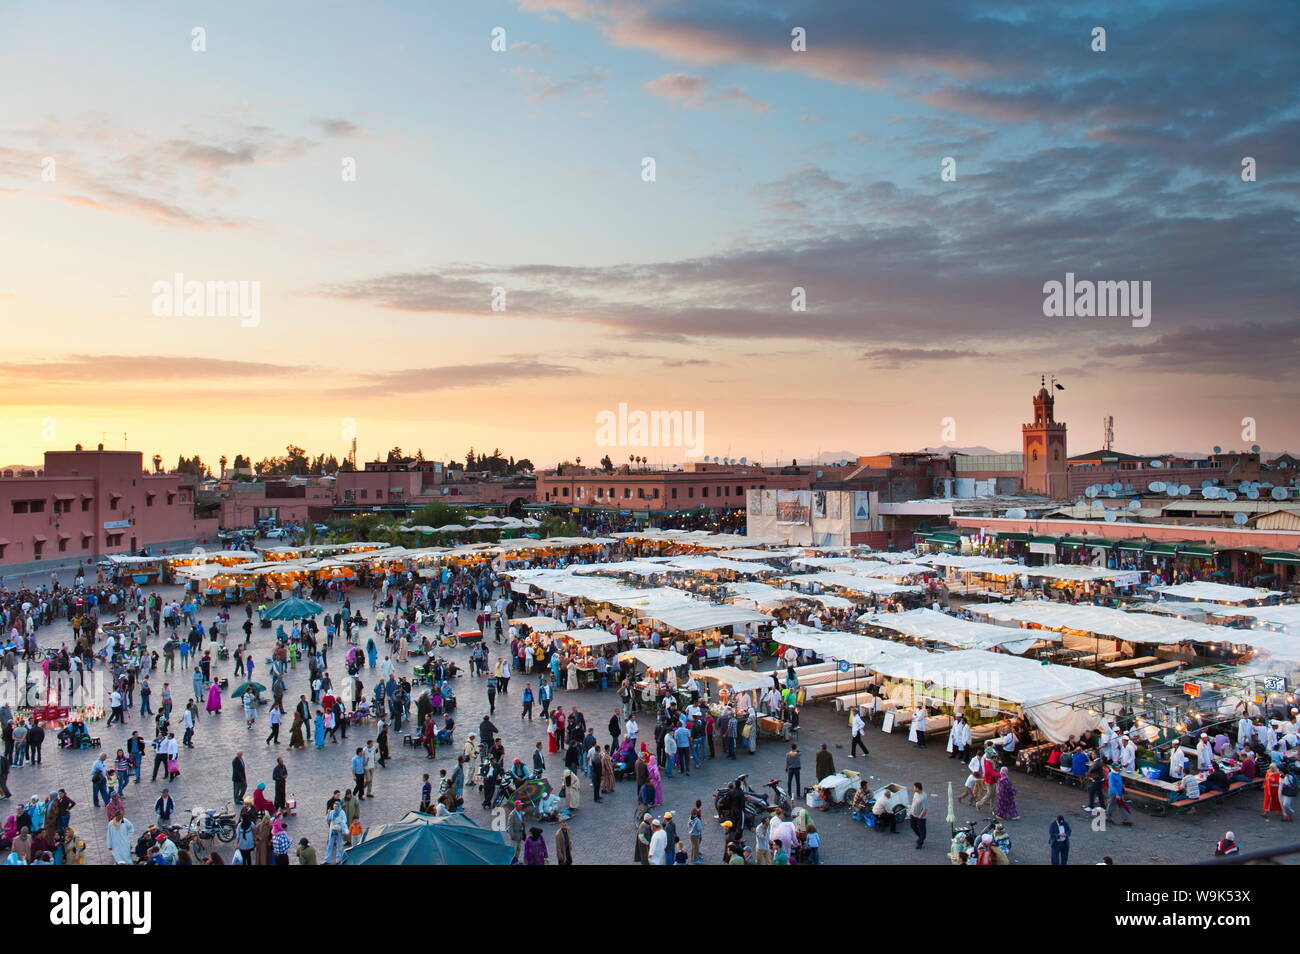 View of the Djemaa el Fna at sunset, Marrakech, Morocco, North Africa, Africa Stock Photo